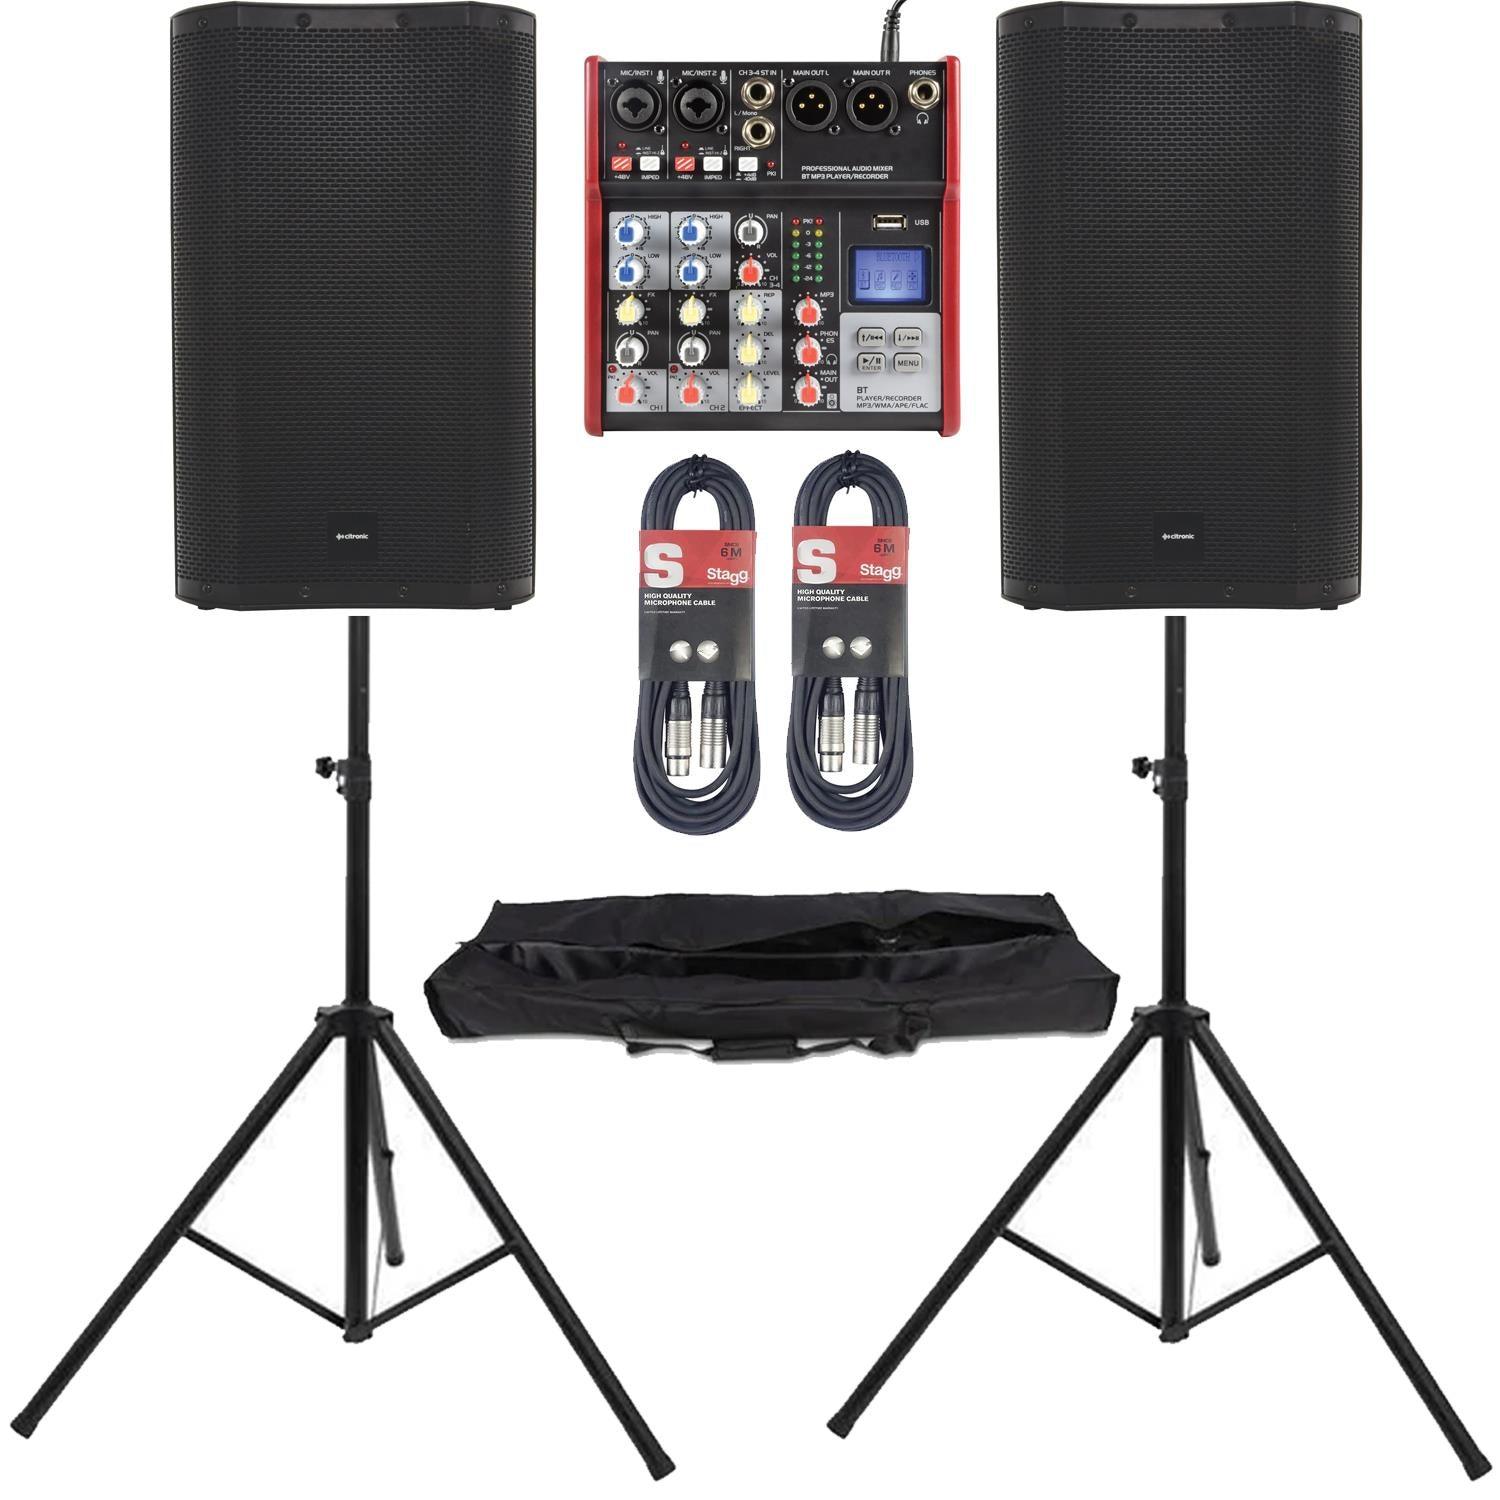 2 x Citronic CASA-15A Active Speakers with Mixer, Stand & Cables - DY Pro Audio